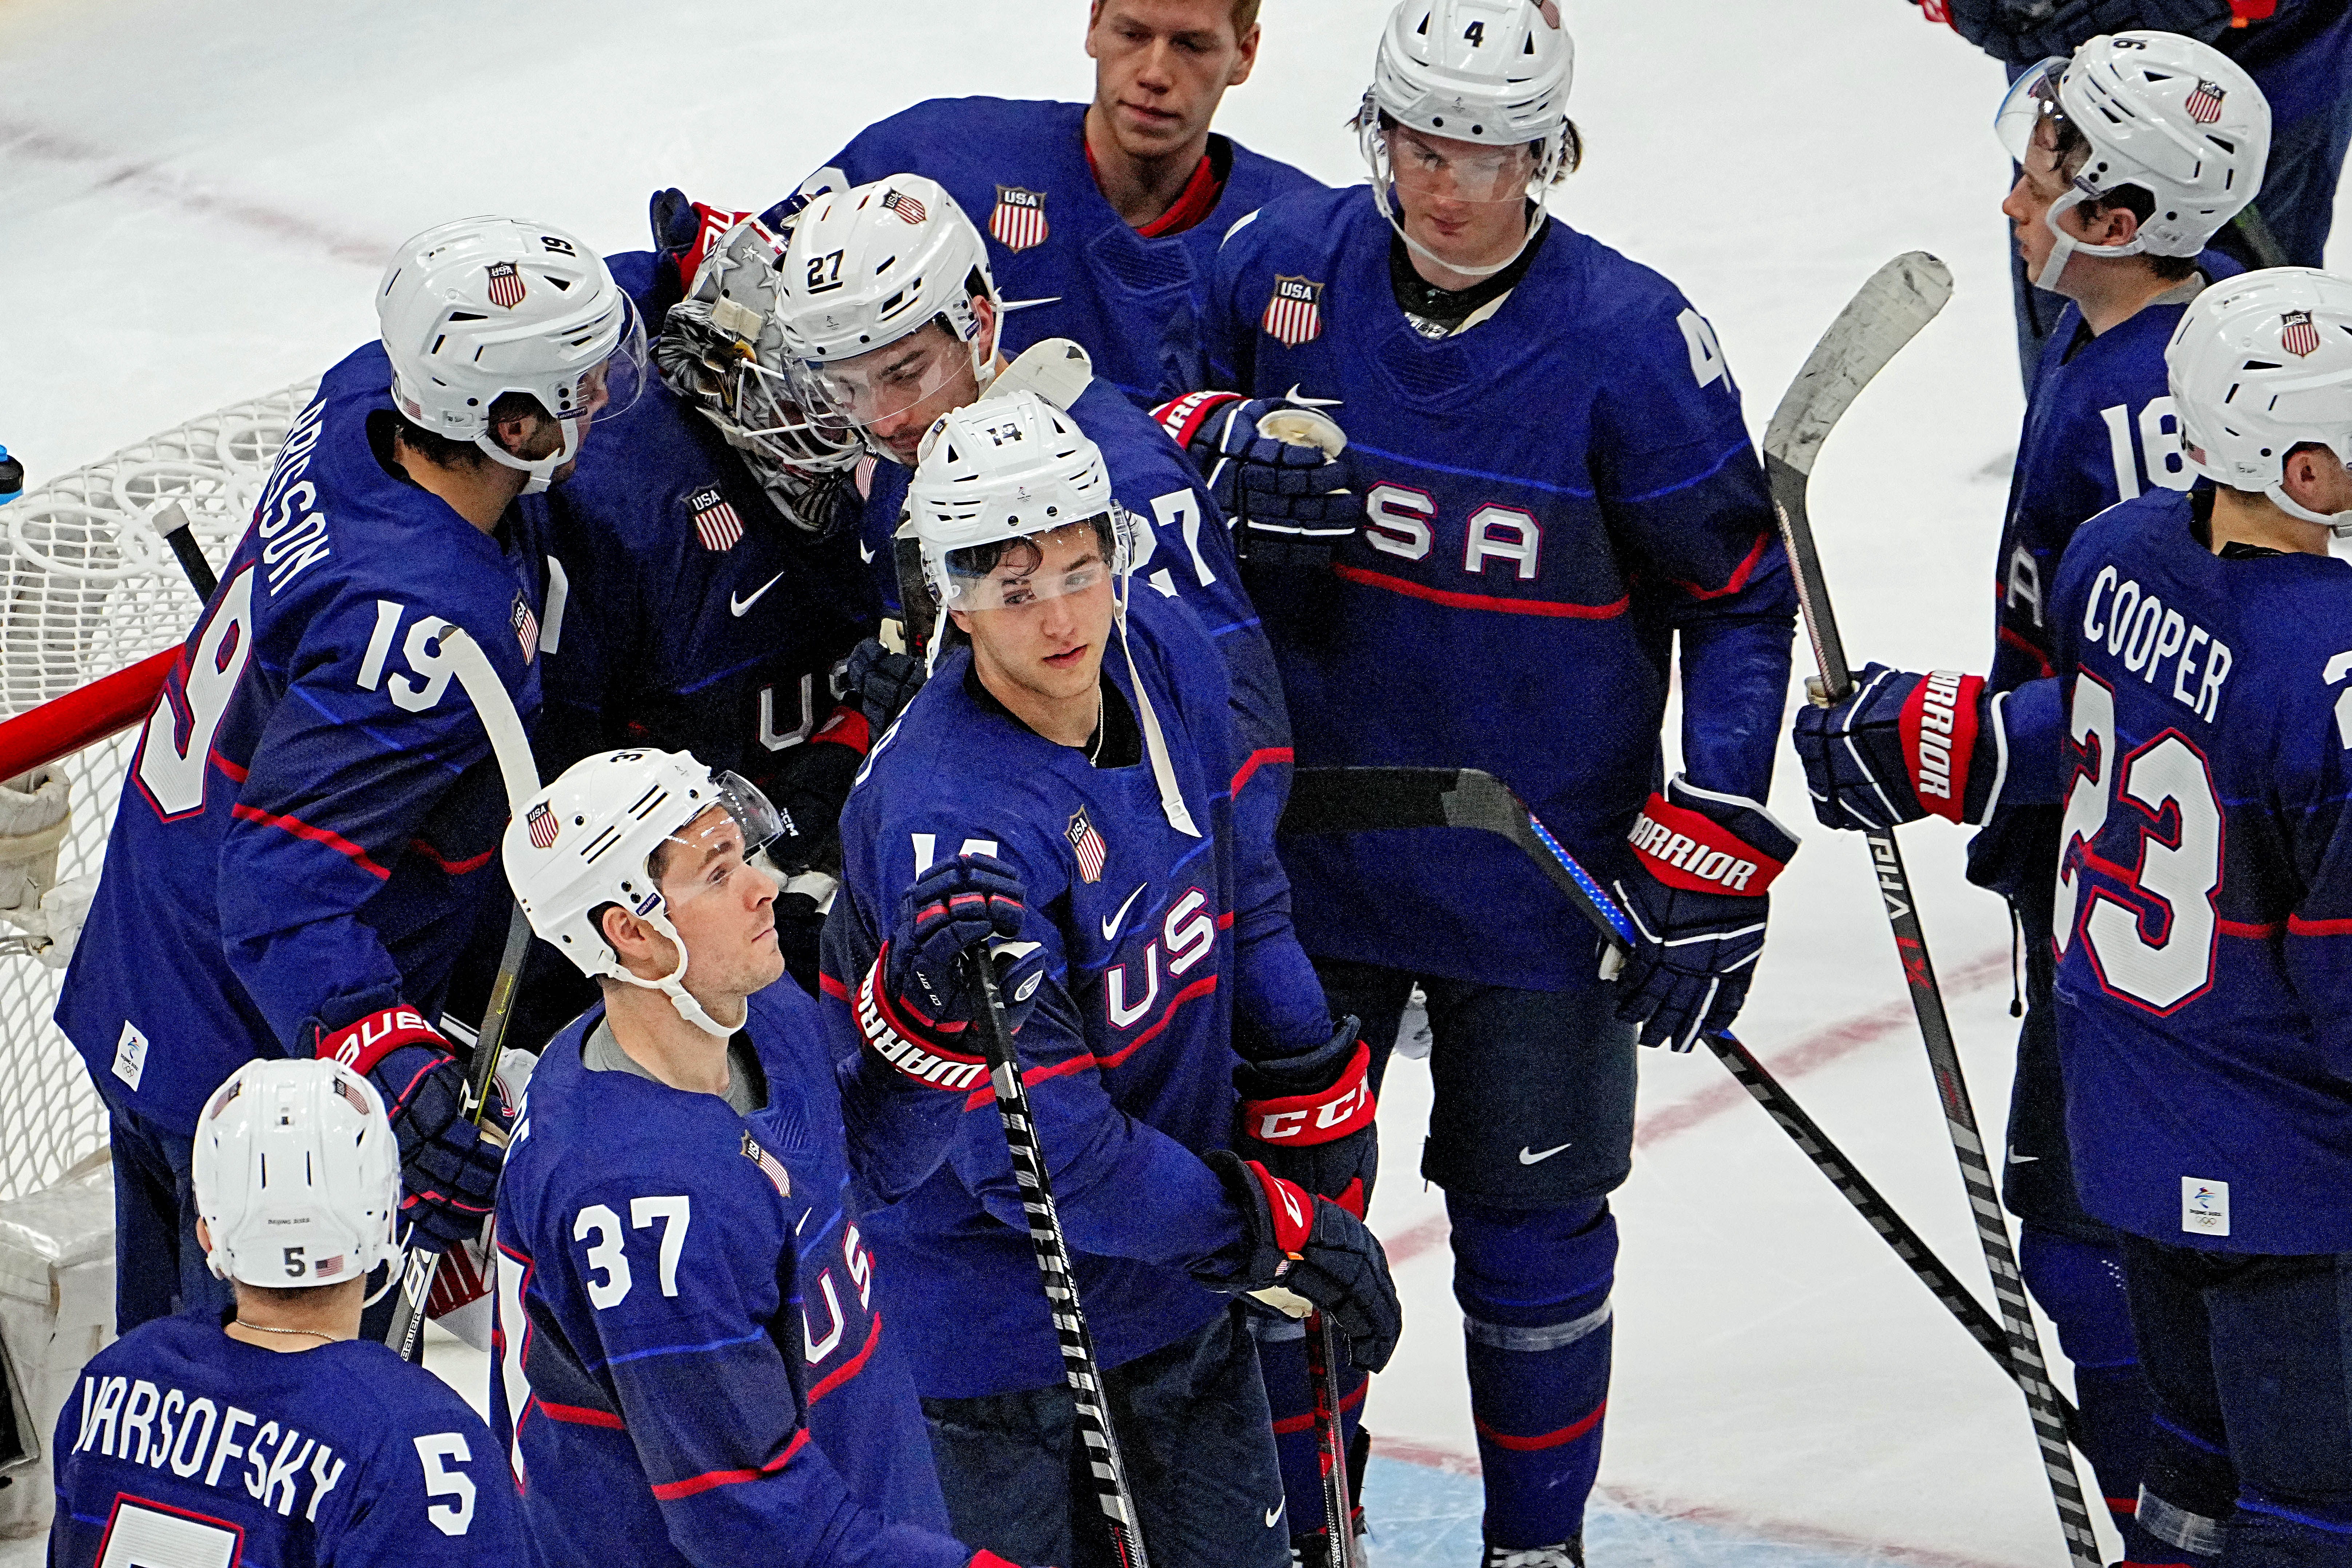 United States vs. Canada live stream, TV channel, start time, how to watch 2023 World Junior Hockey Championship: